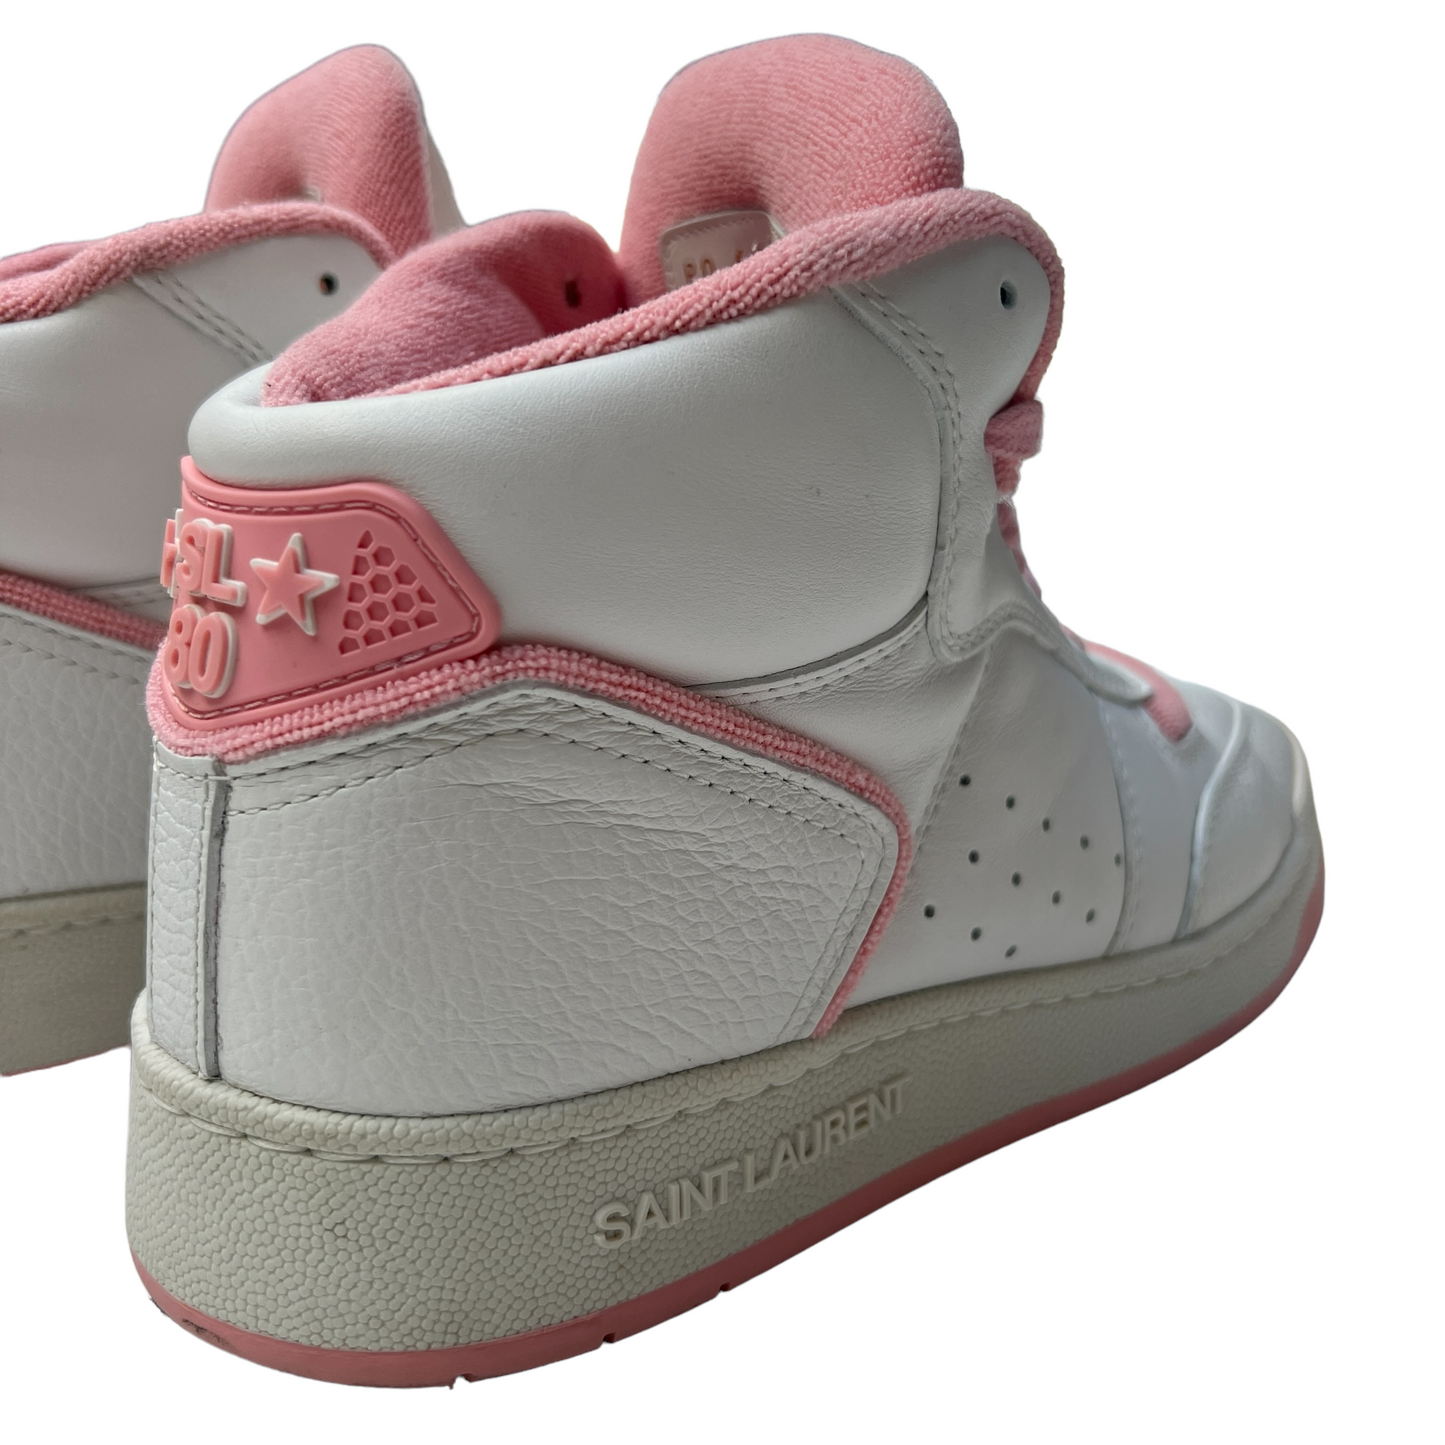 White and Pink High Top Sneakers - 8